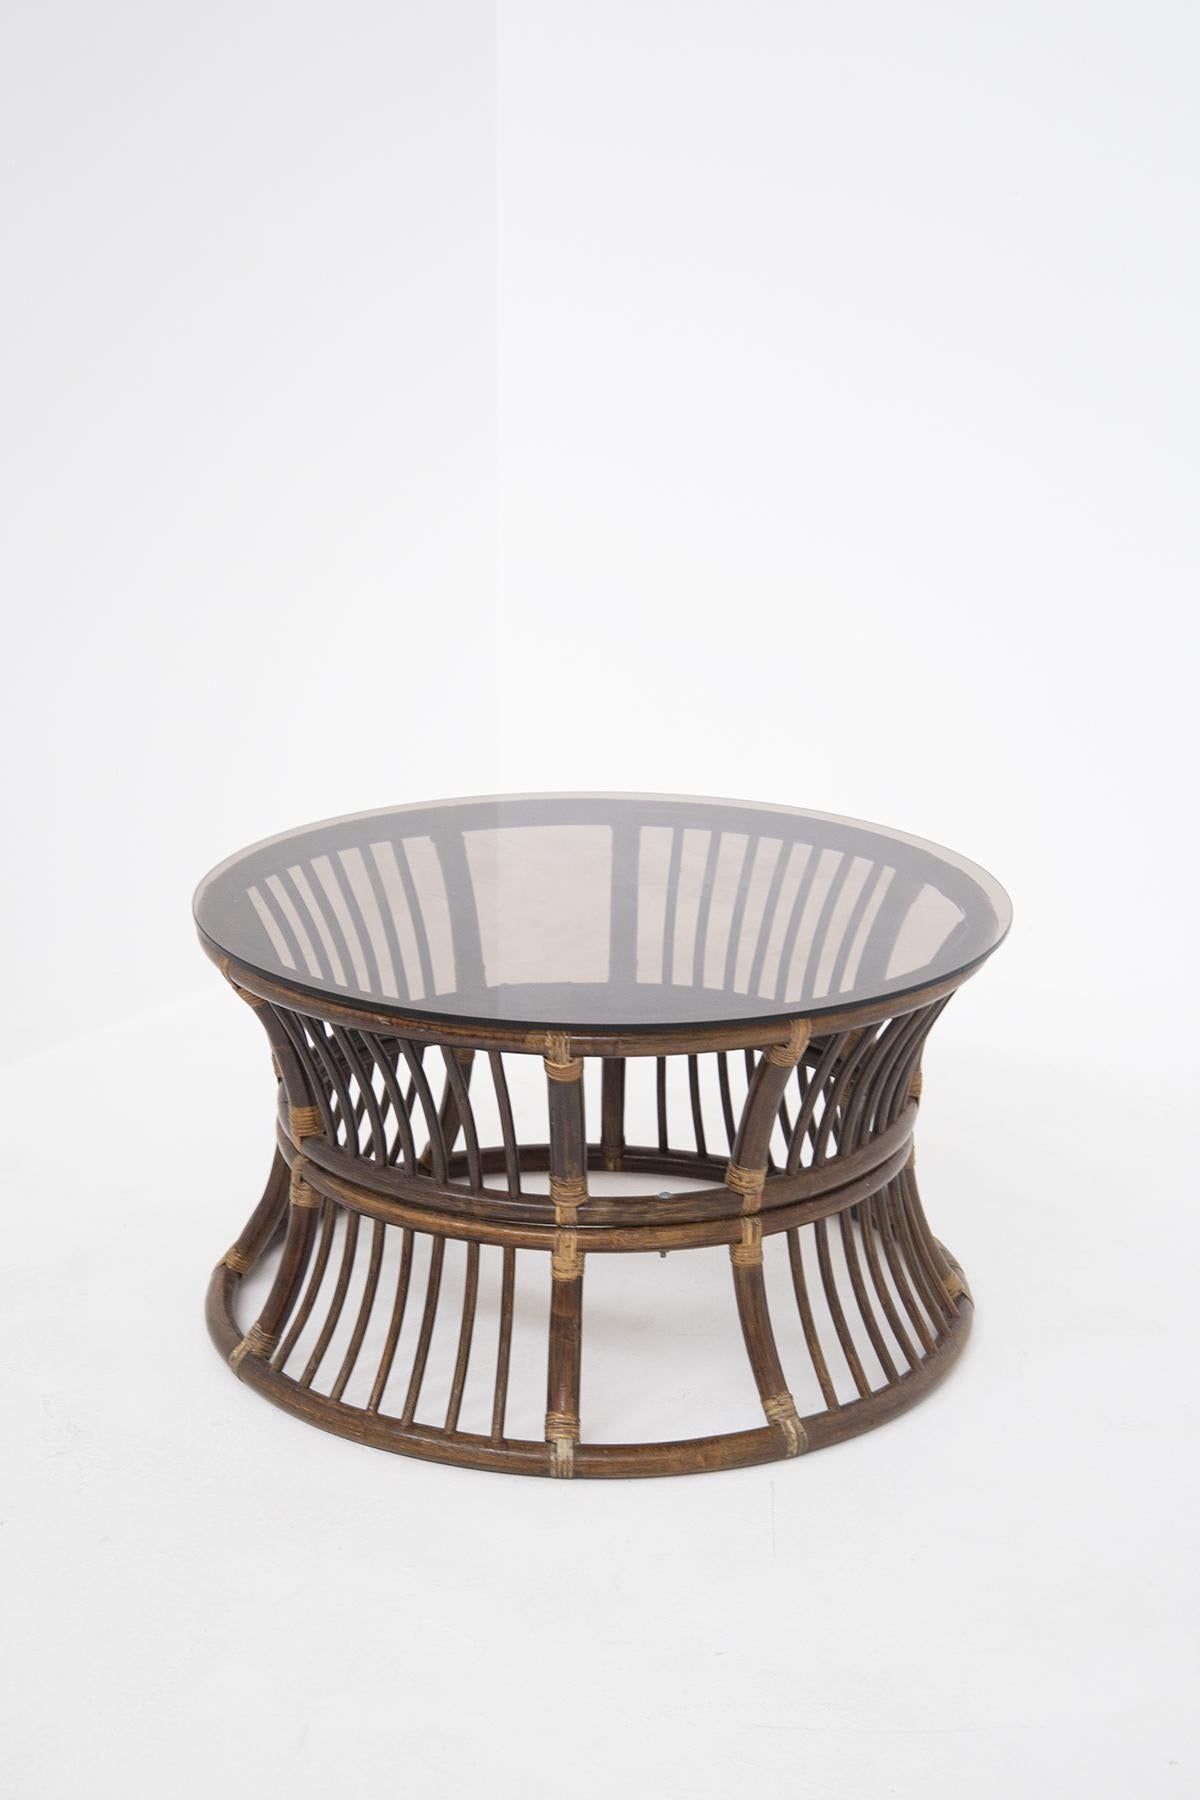 Italian bamboo coffee table with vintage glass top from the 1950s. The coffee table is made with a bamboo frame. Its table top is detached from its structure and is made of dark smoked glass with a circular shape. 
The coffee table is ideal for